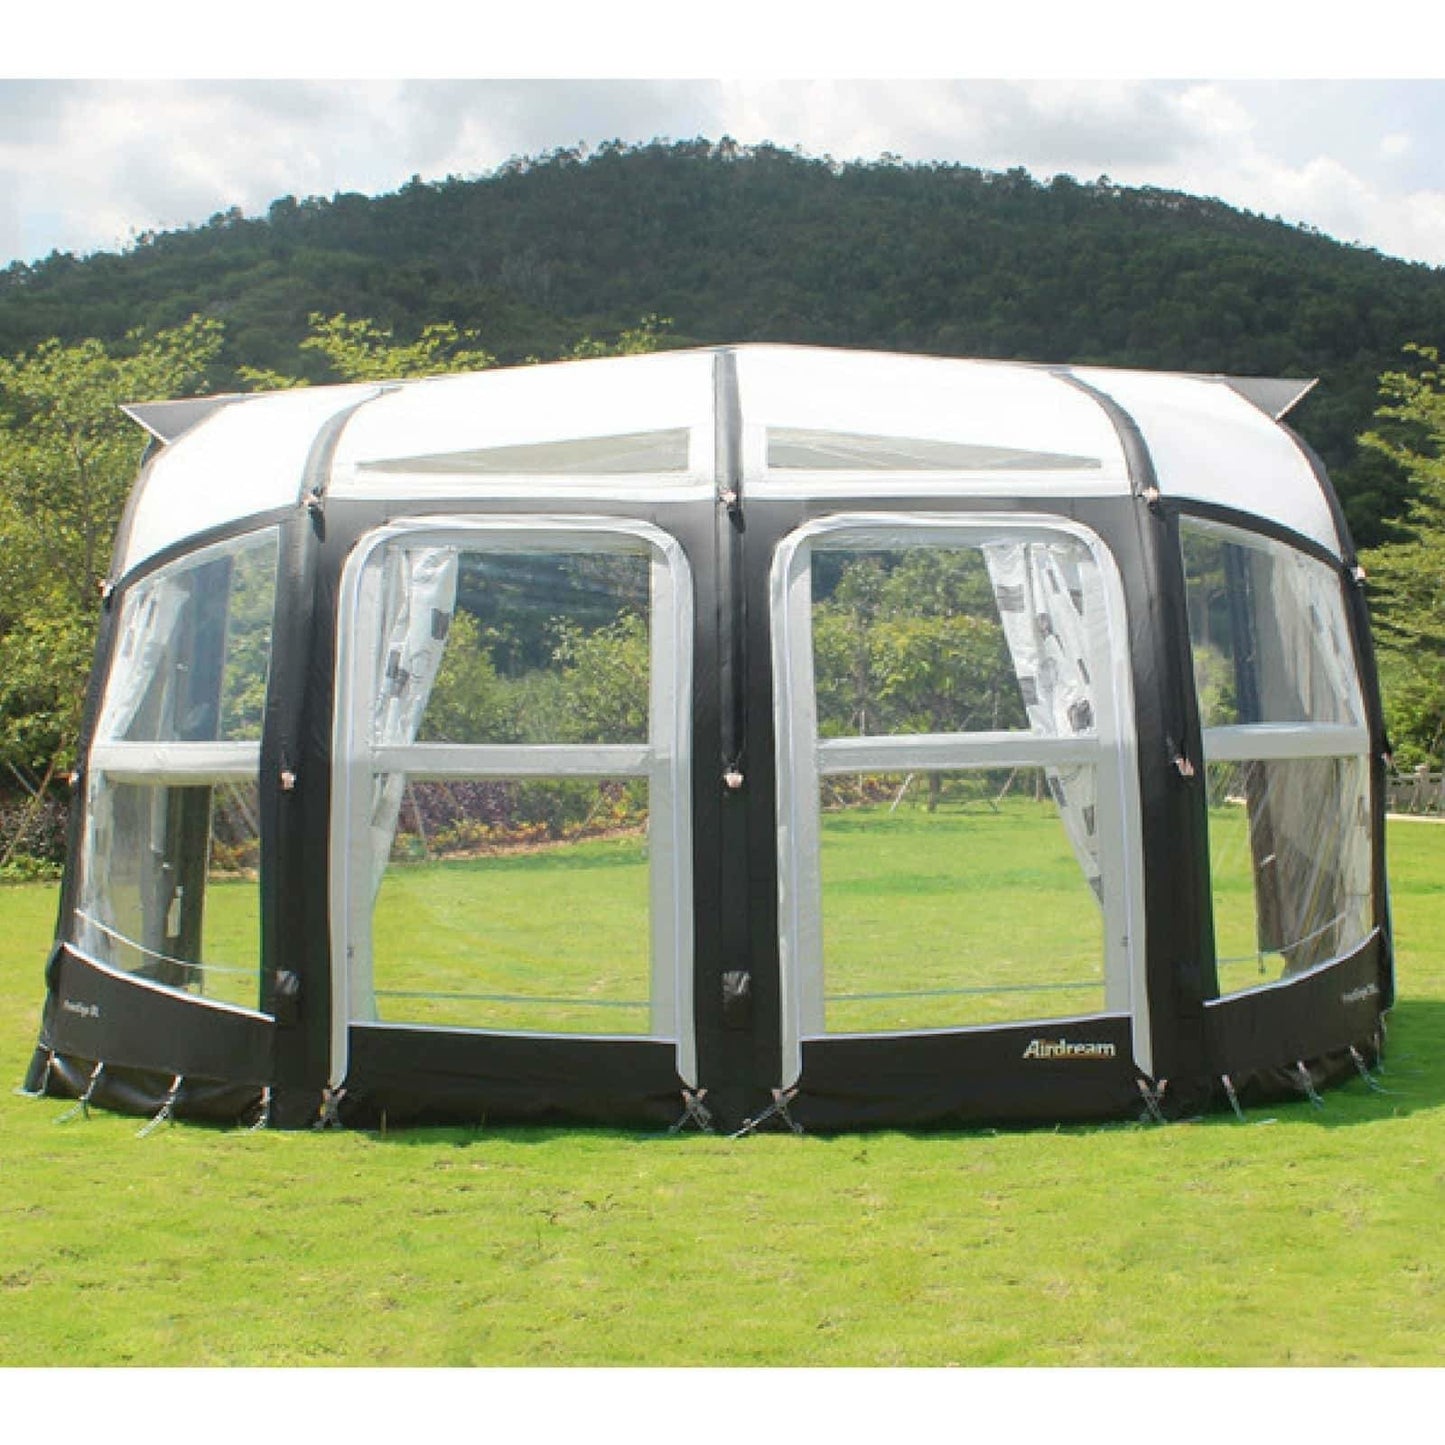 Camptech AirDream Prestige DL Inflatable Air Porch Caravan Awning + FREE Straps (2019) made by CampTech. A Air Awning sold by Quality Caravan Awnings